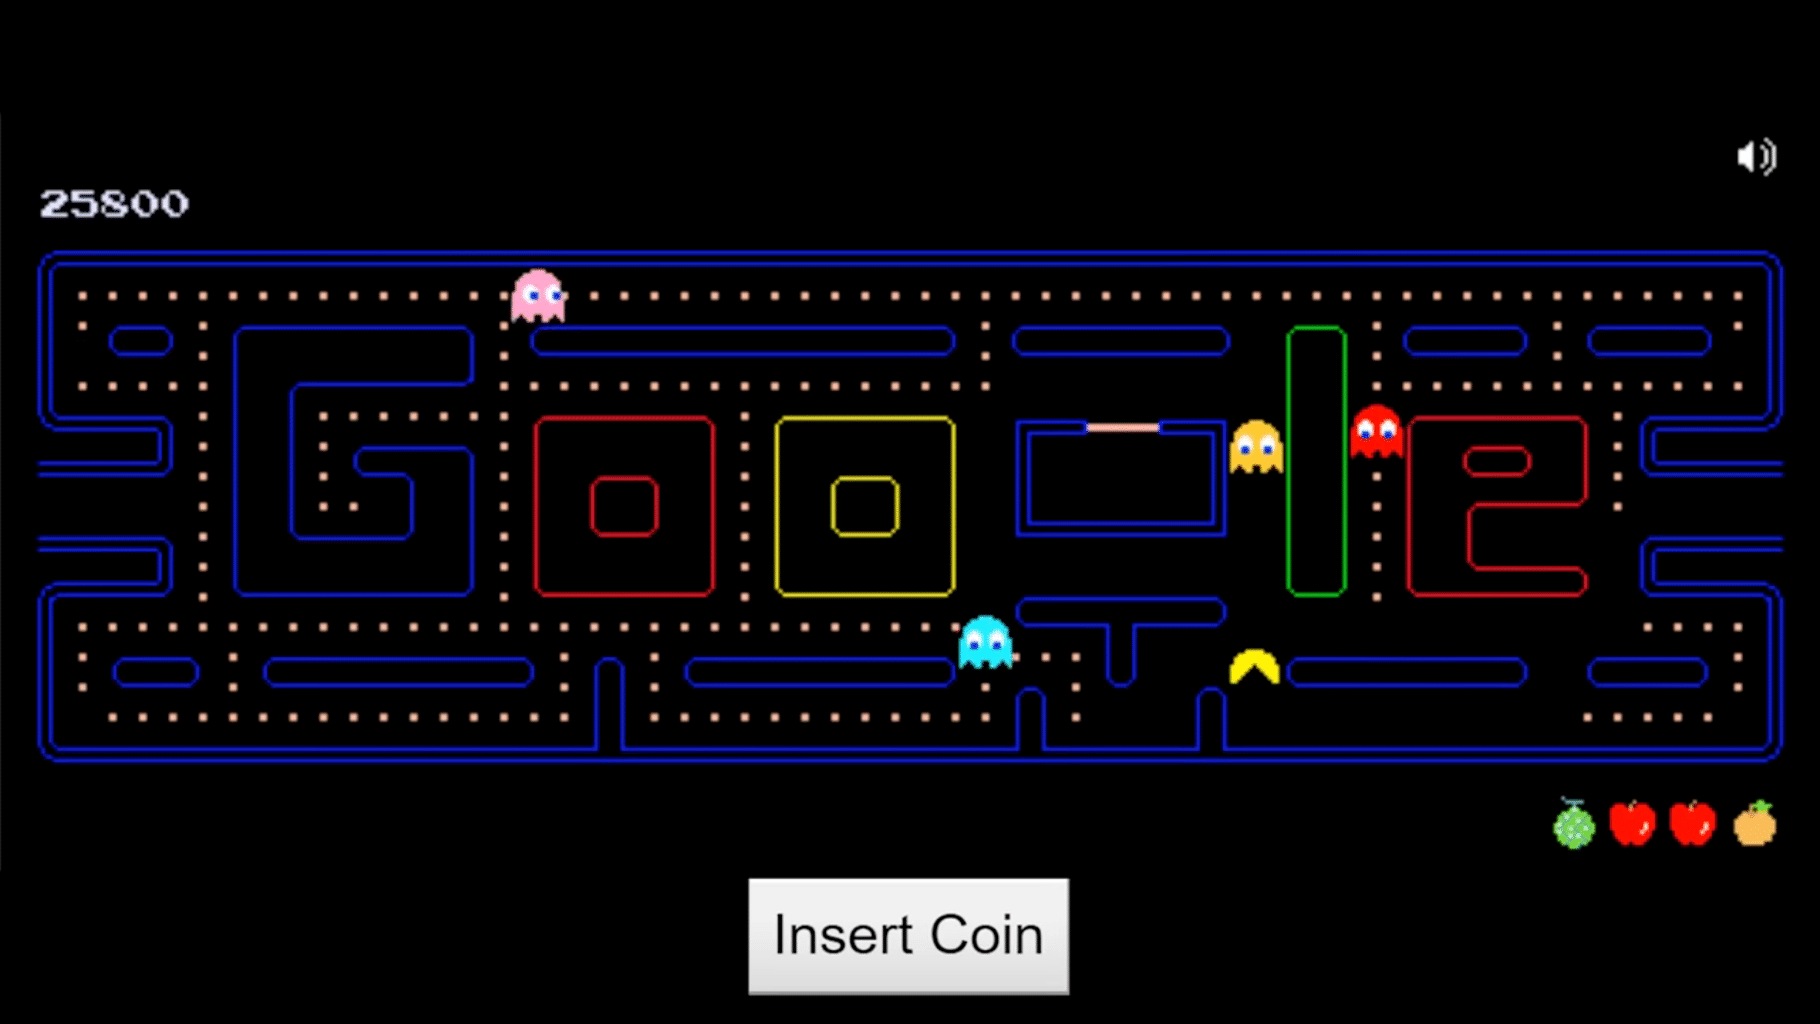 PacMan 30th Anniversary Google Doodle Game  Doodles games, Google doodle  games, Google doodles